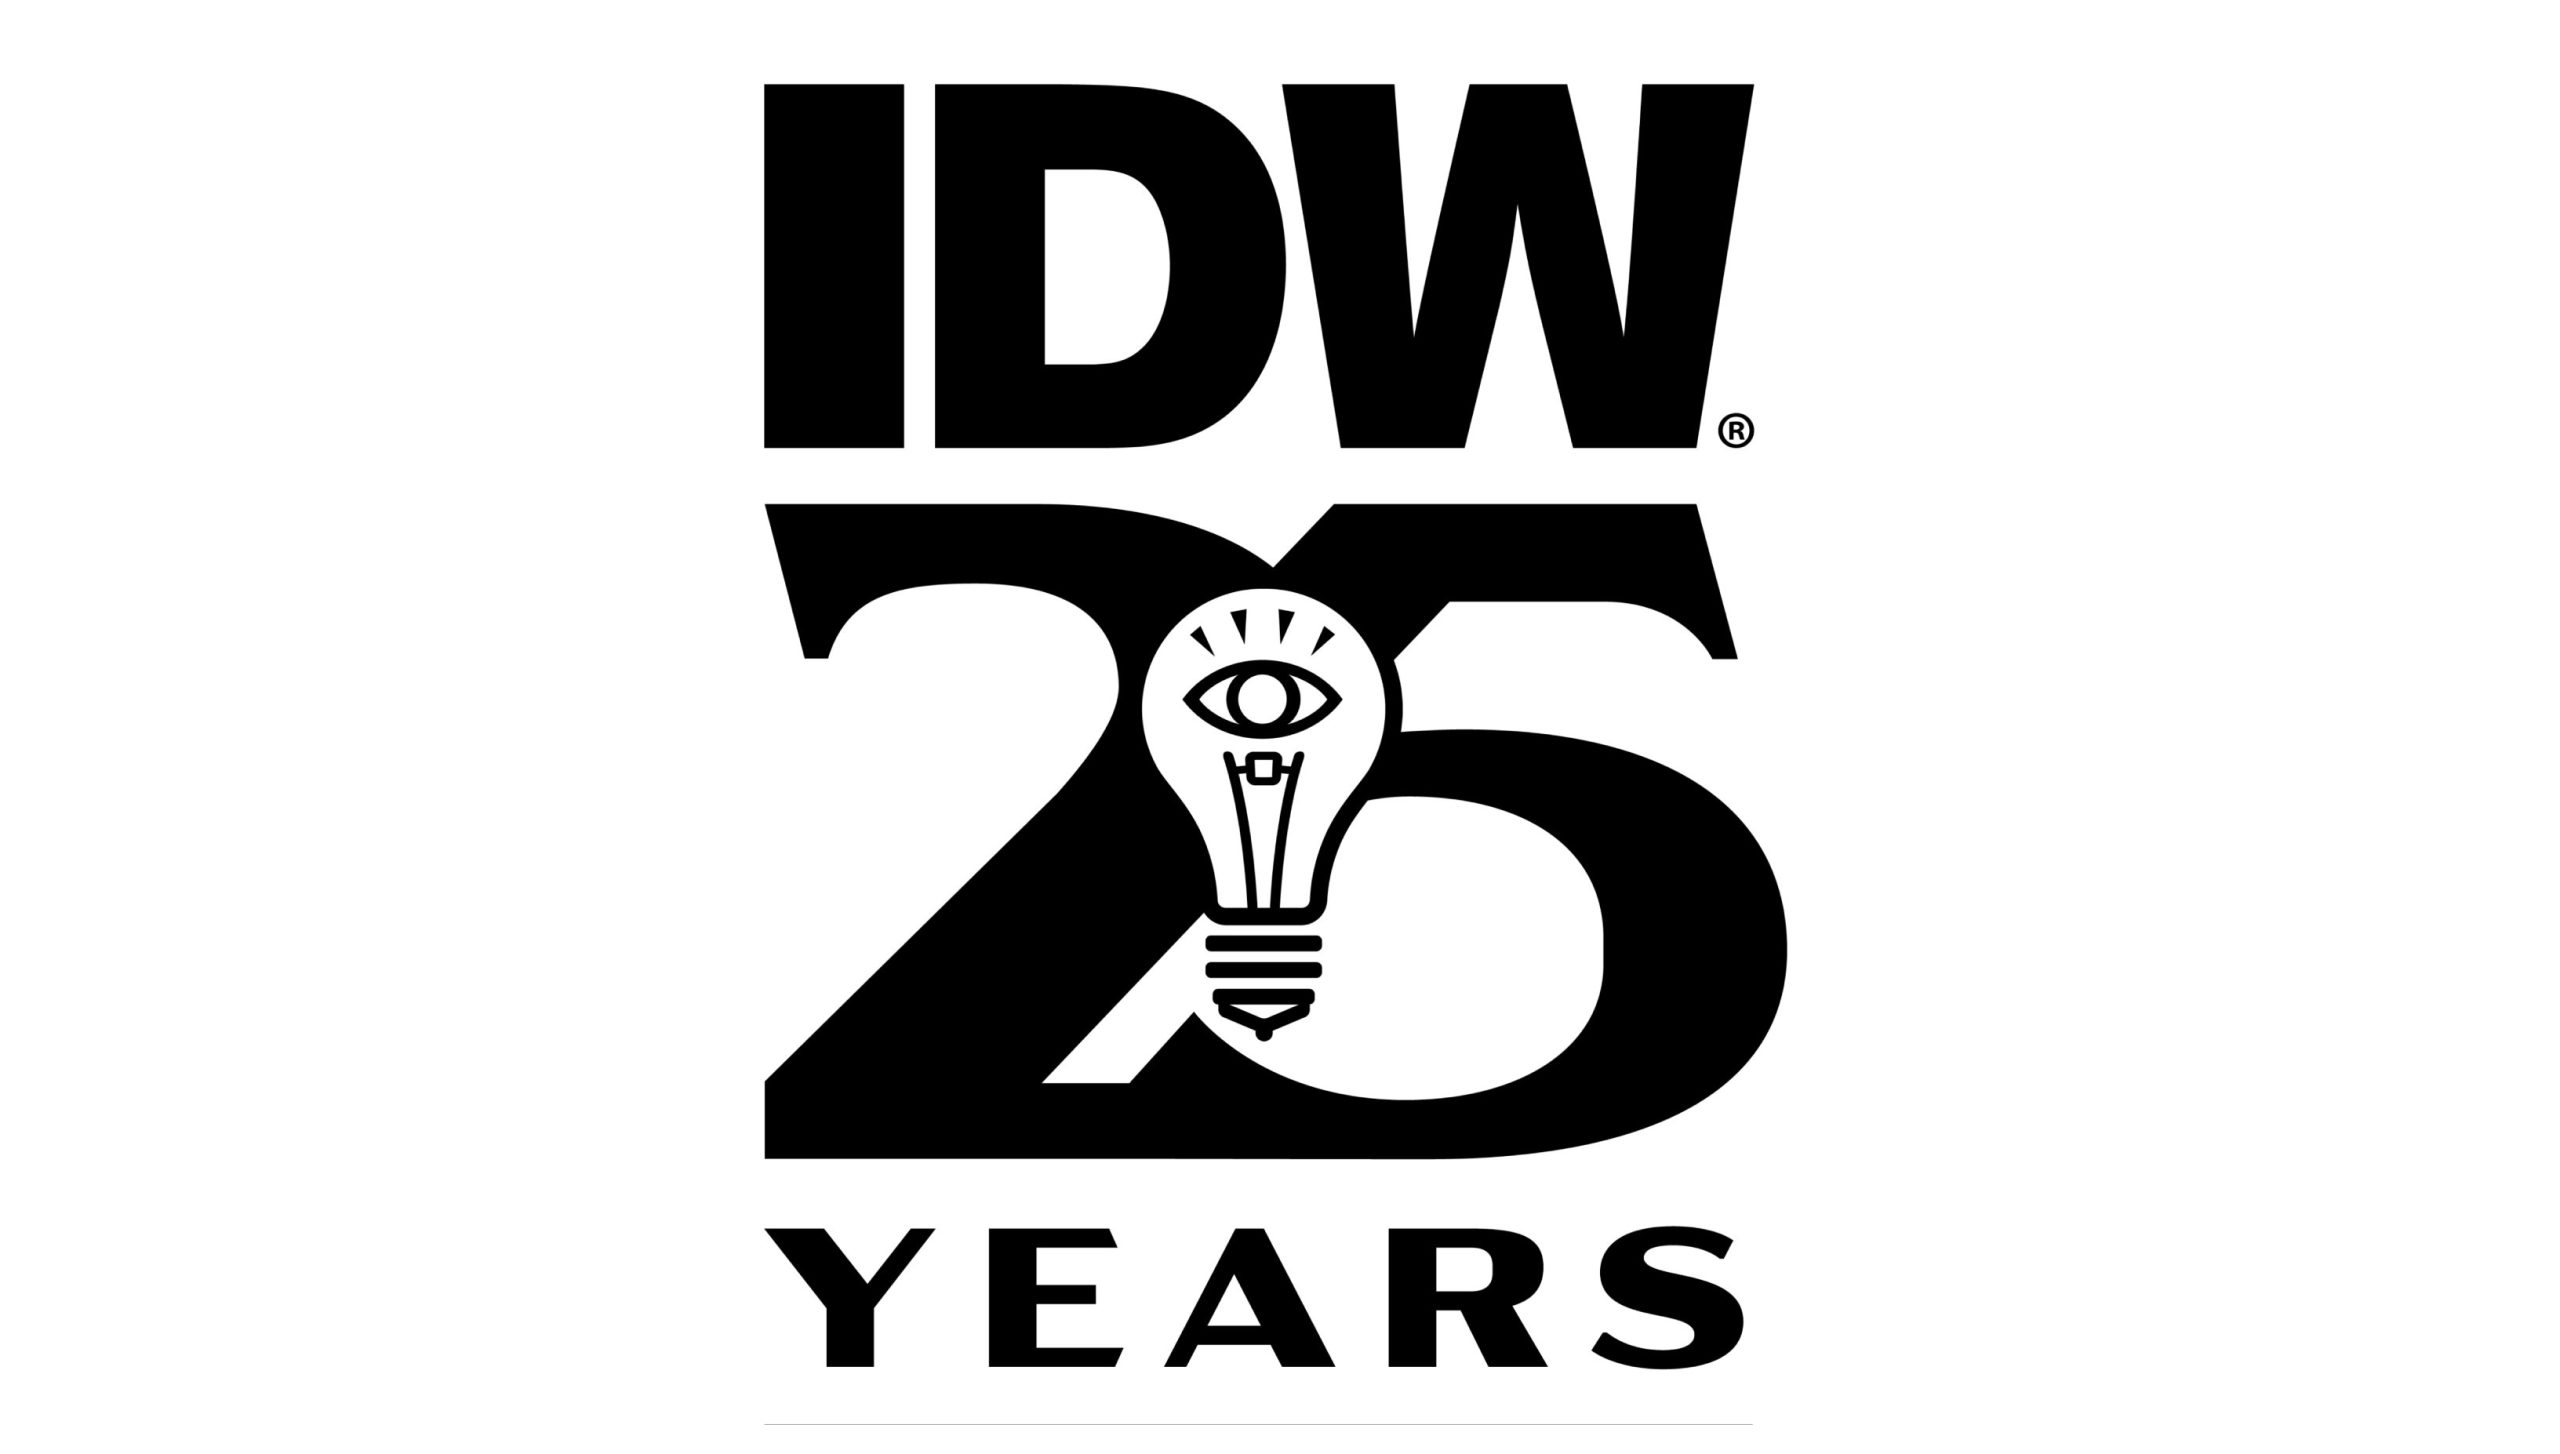 IDW celebrates 25 years with new logo and solicits catalog